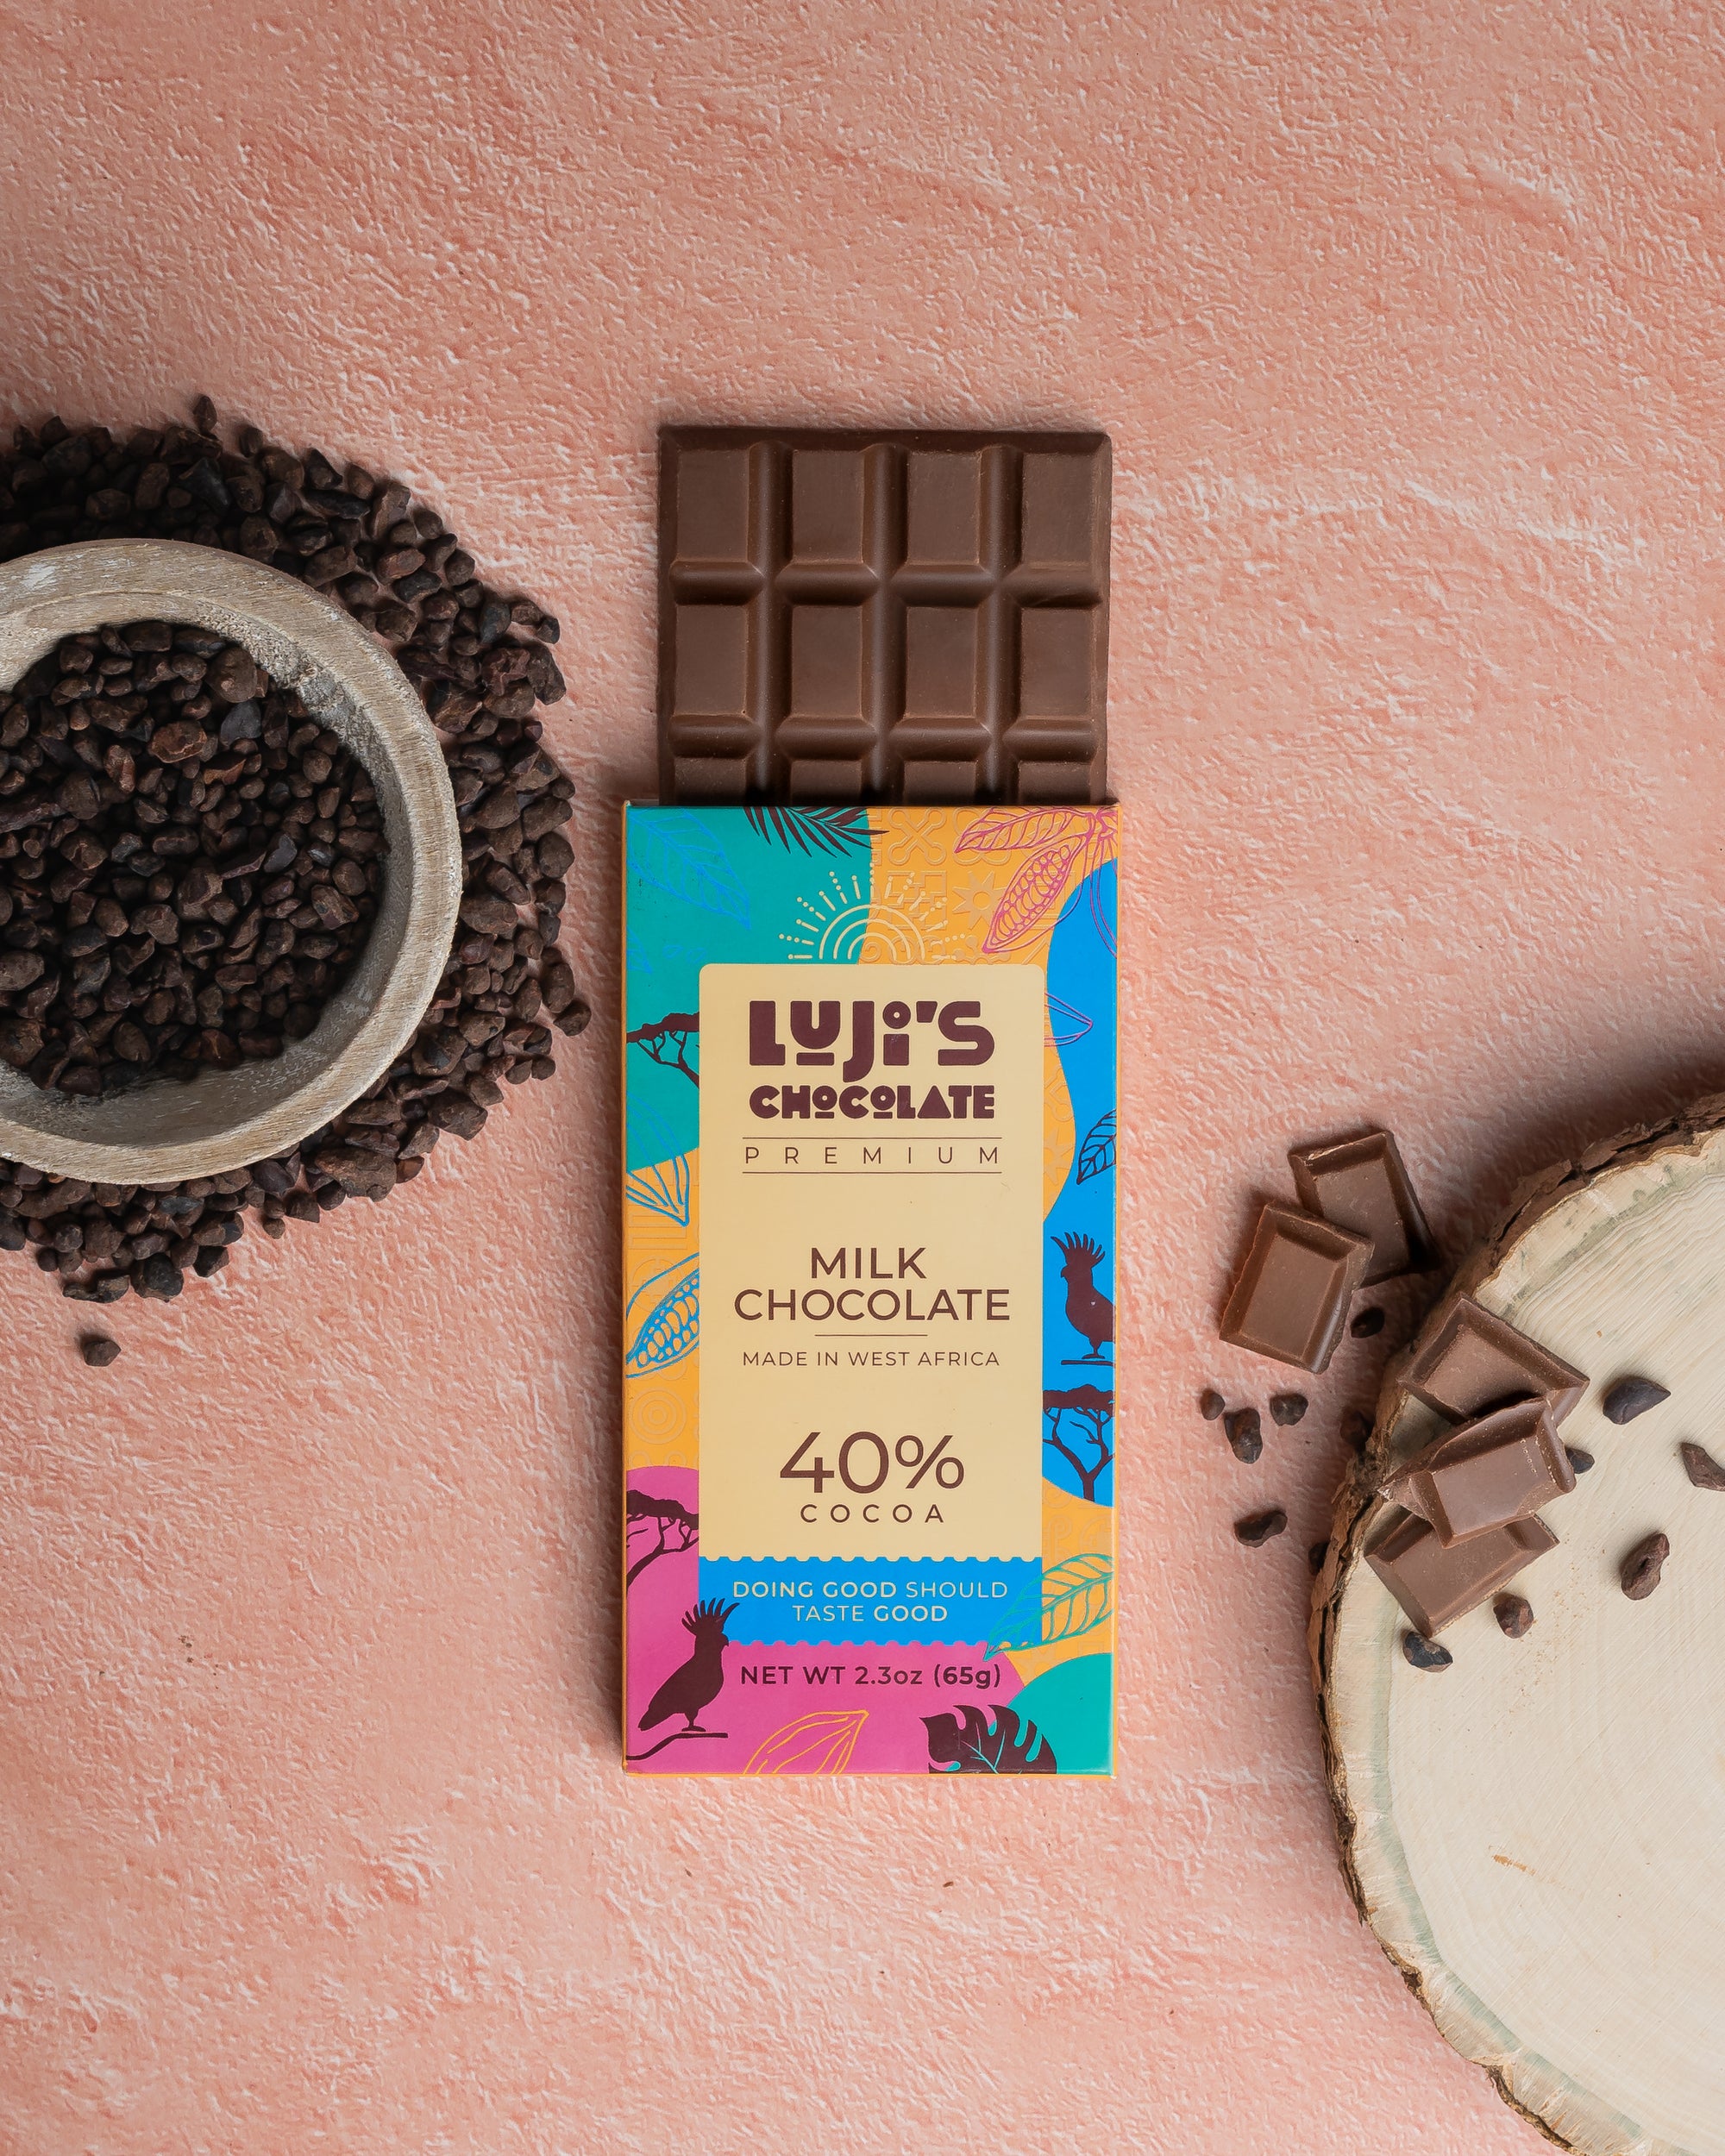 Luji's Chocolate Milk Chocolate bar opened beside a bowl of cocoa beans, with chocolate chunks on a cut tree stump, conveying the natural and pure ingredients used in the chocolate against a pink backdrop."